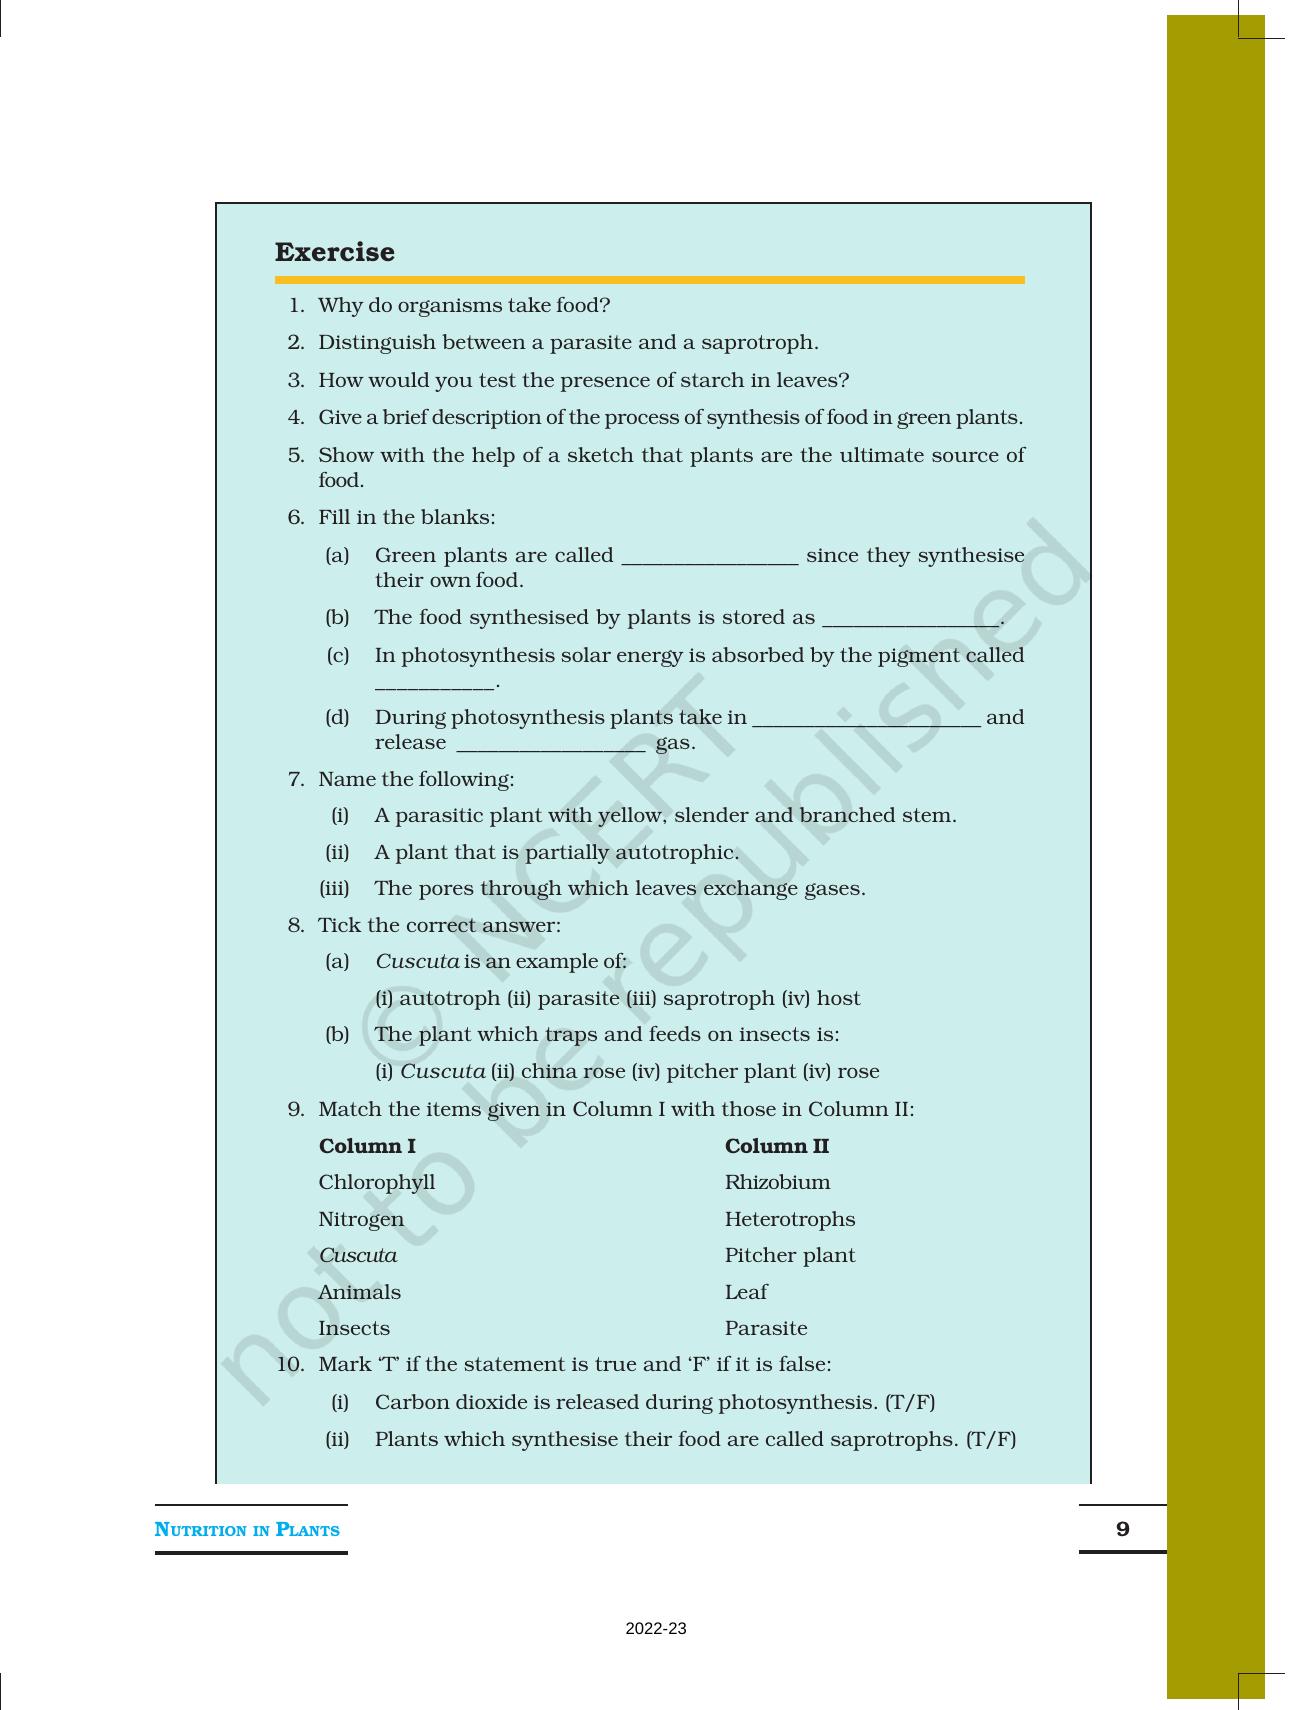 NCERT Book for Class 7 Science: Chapter 1-Nutrition in Plants - Page 9